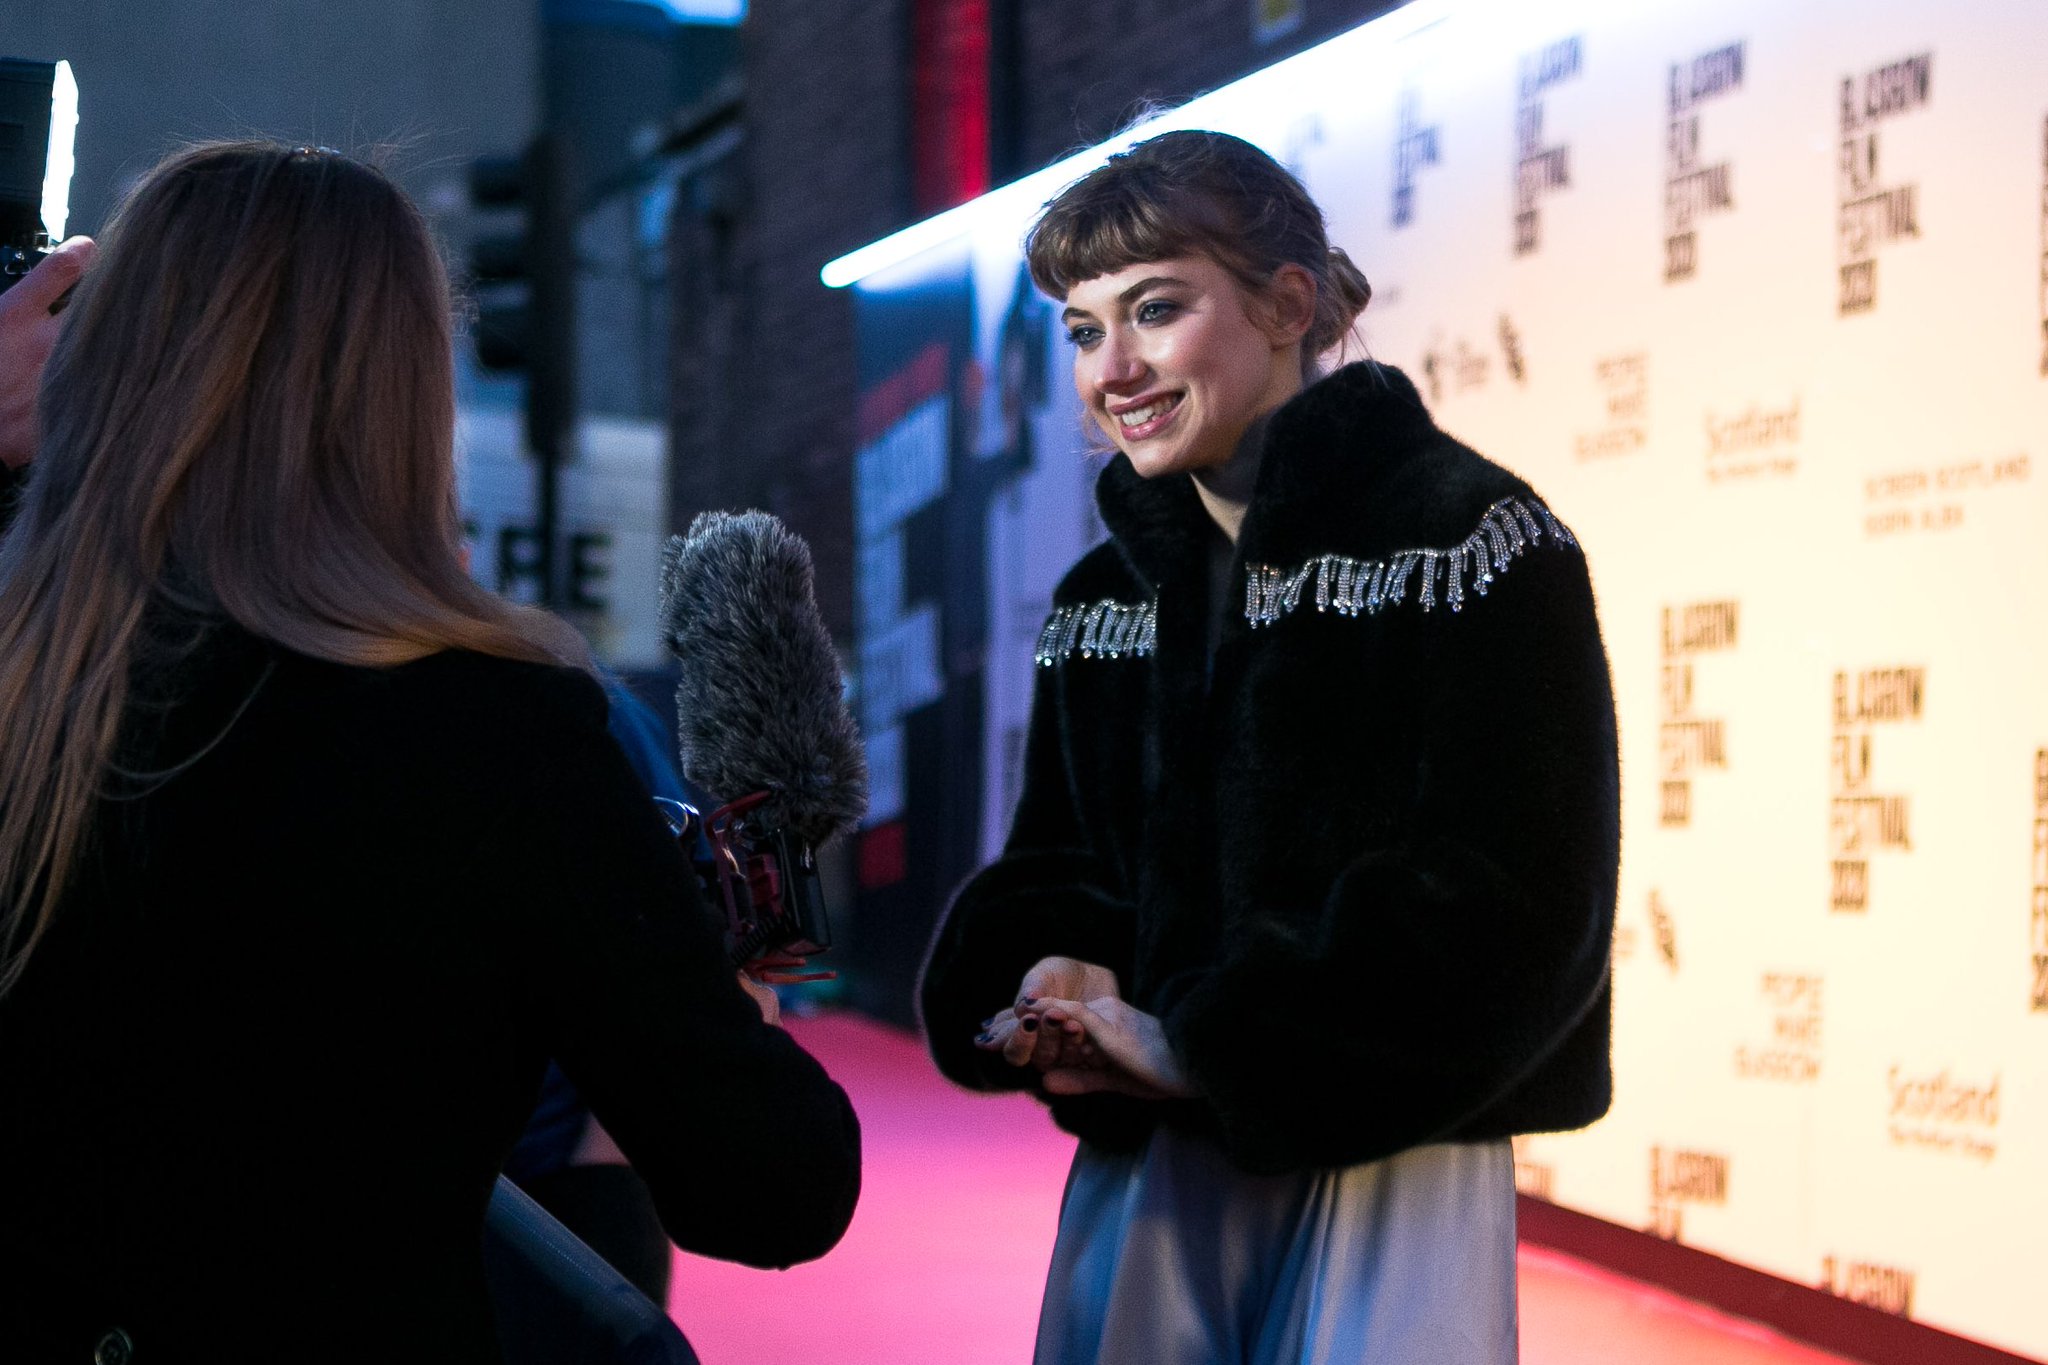 Wishing a very happy birthday to Imogen Poots, here on the red carpet for Vivarium back for 